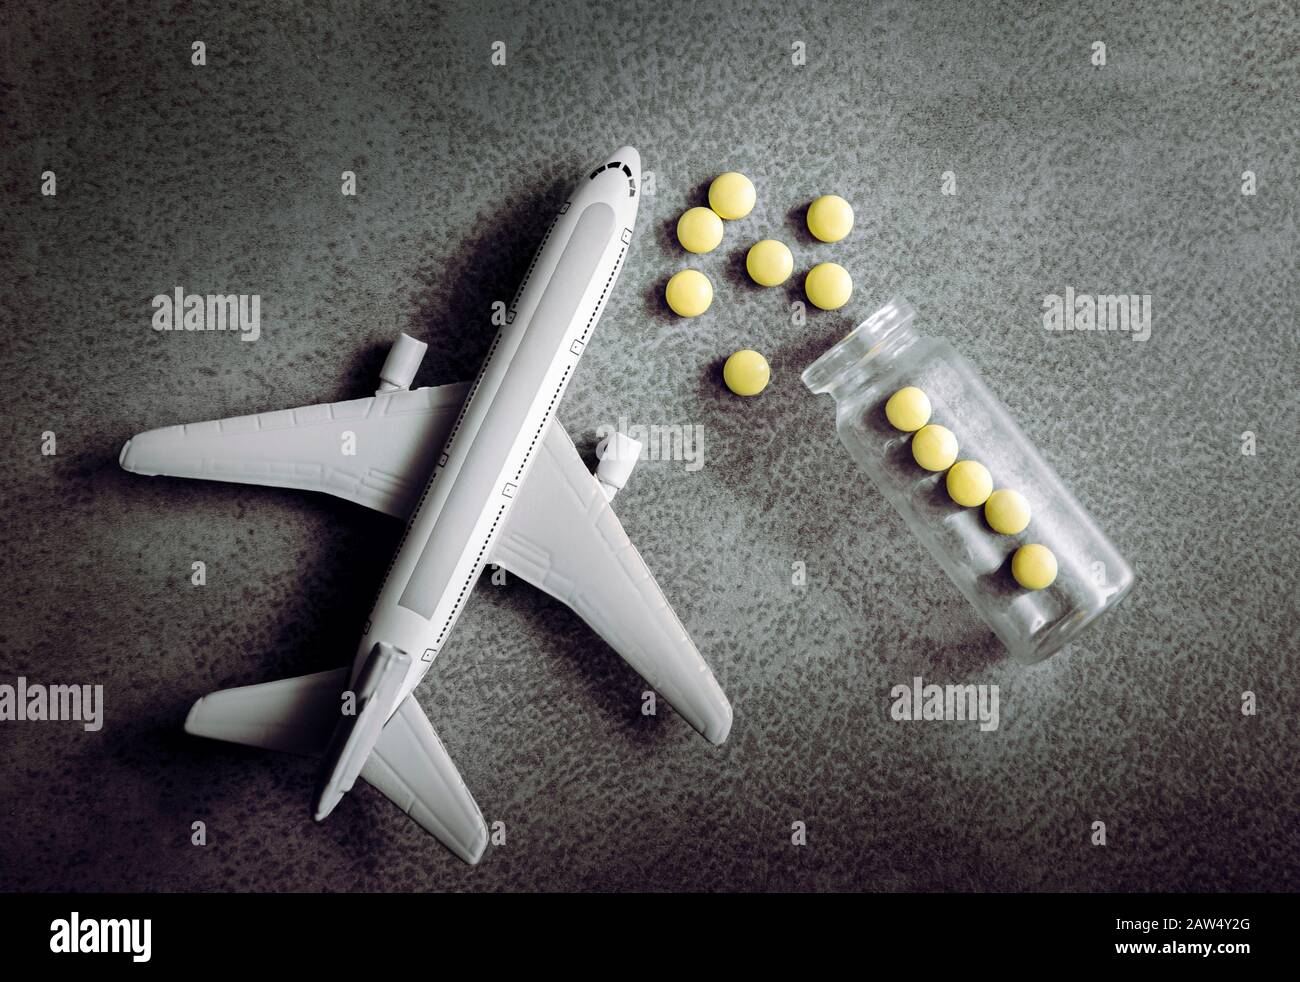 Plane figurine with pills spilled. Travel and medicine concept. Flat lay view with copy space on minimalist gray background. Stock Photo